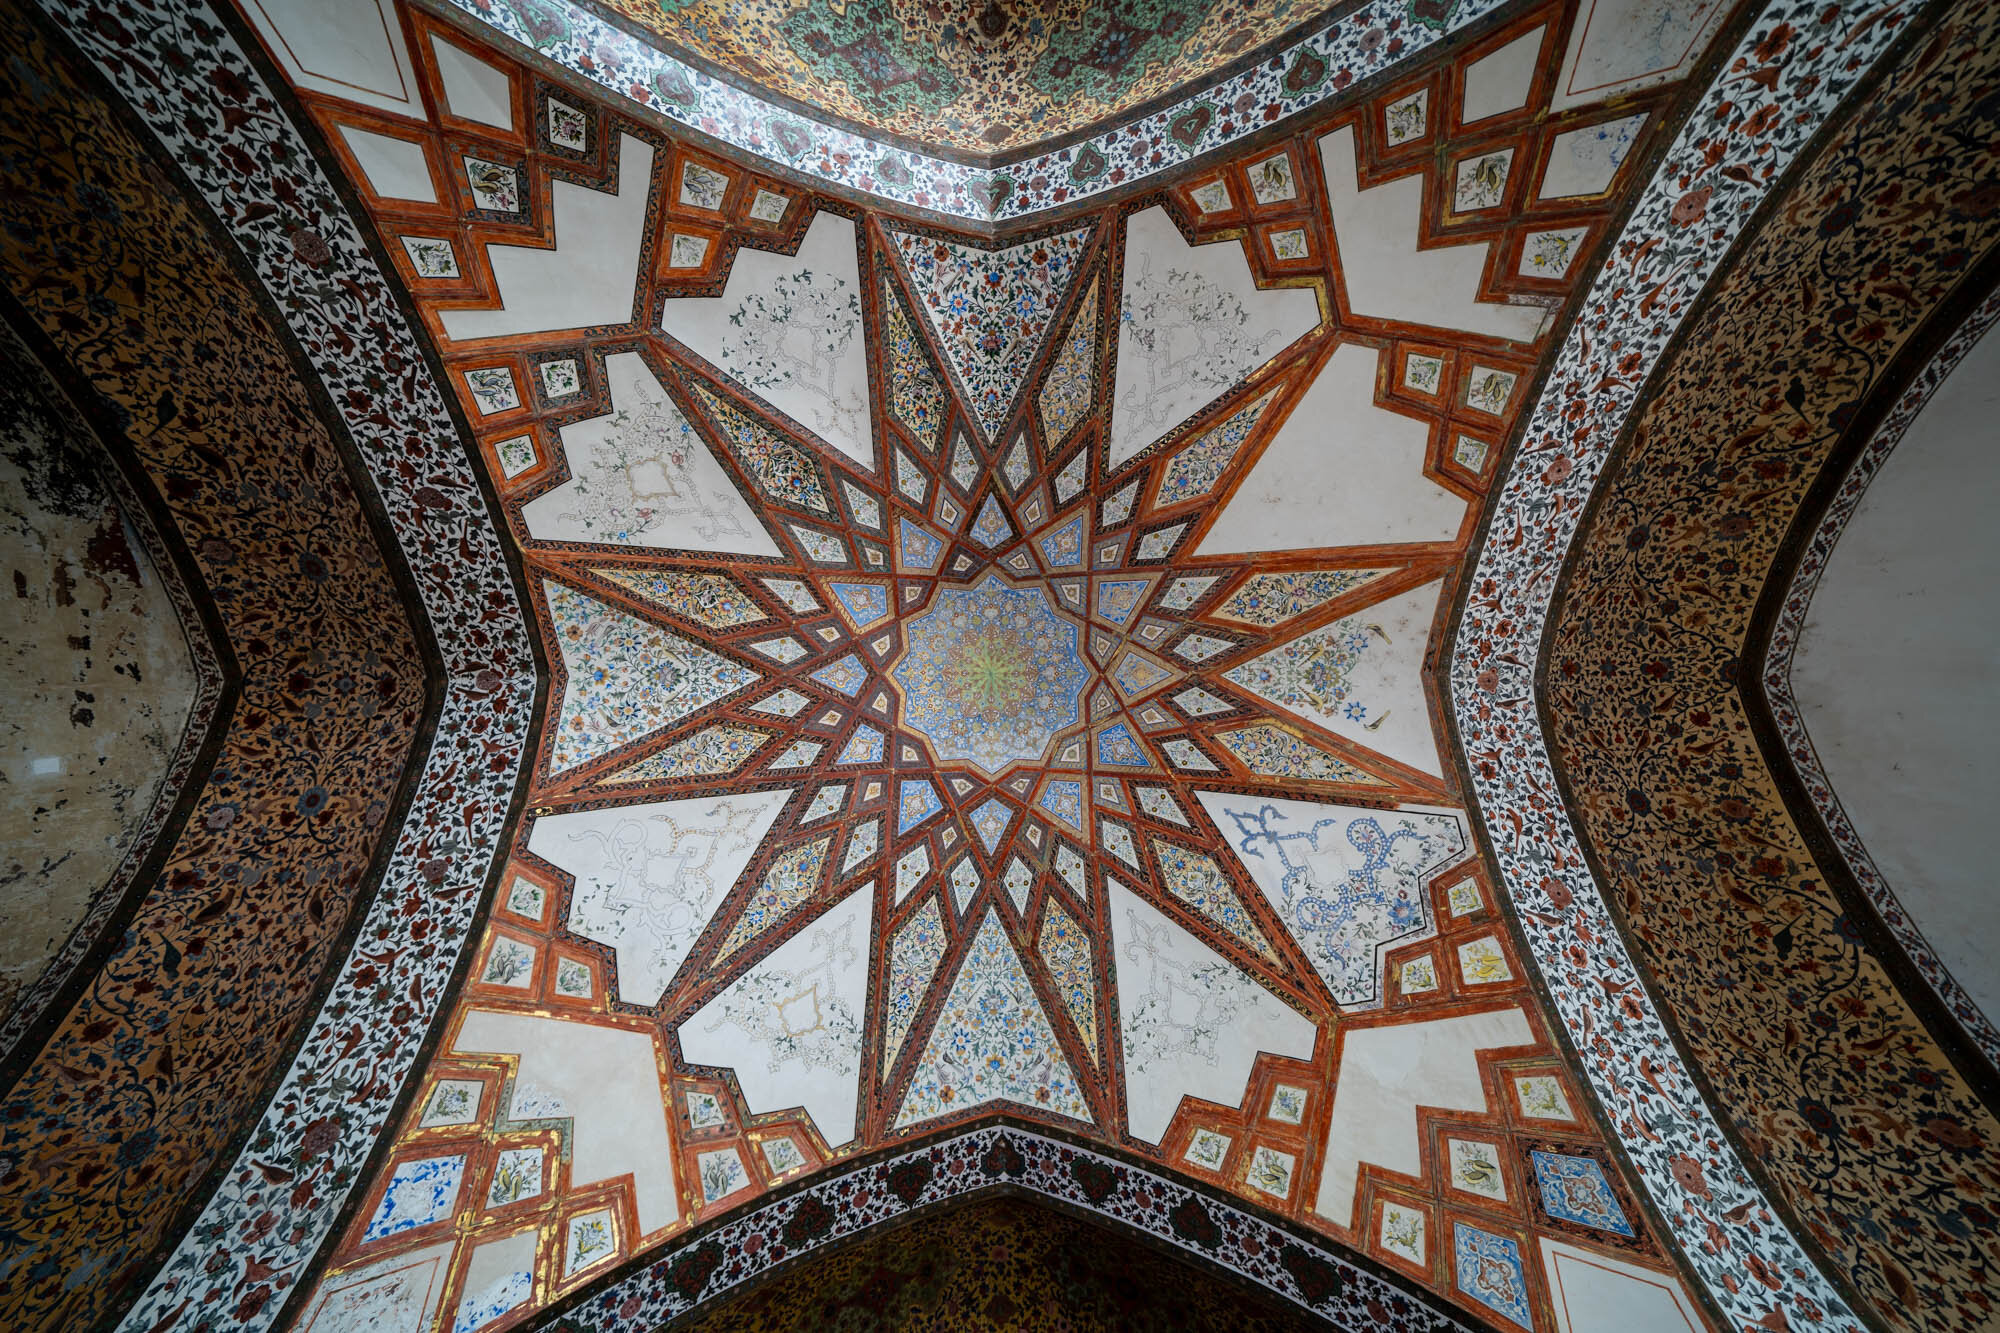  Ceiling details from the Fin Garden, Kashan 